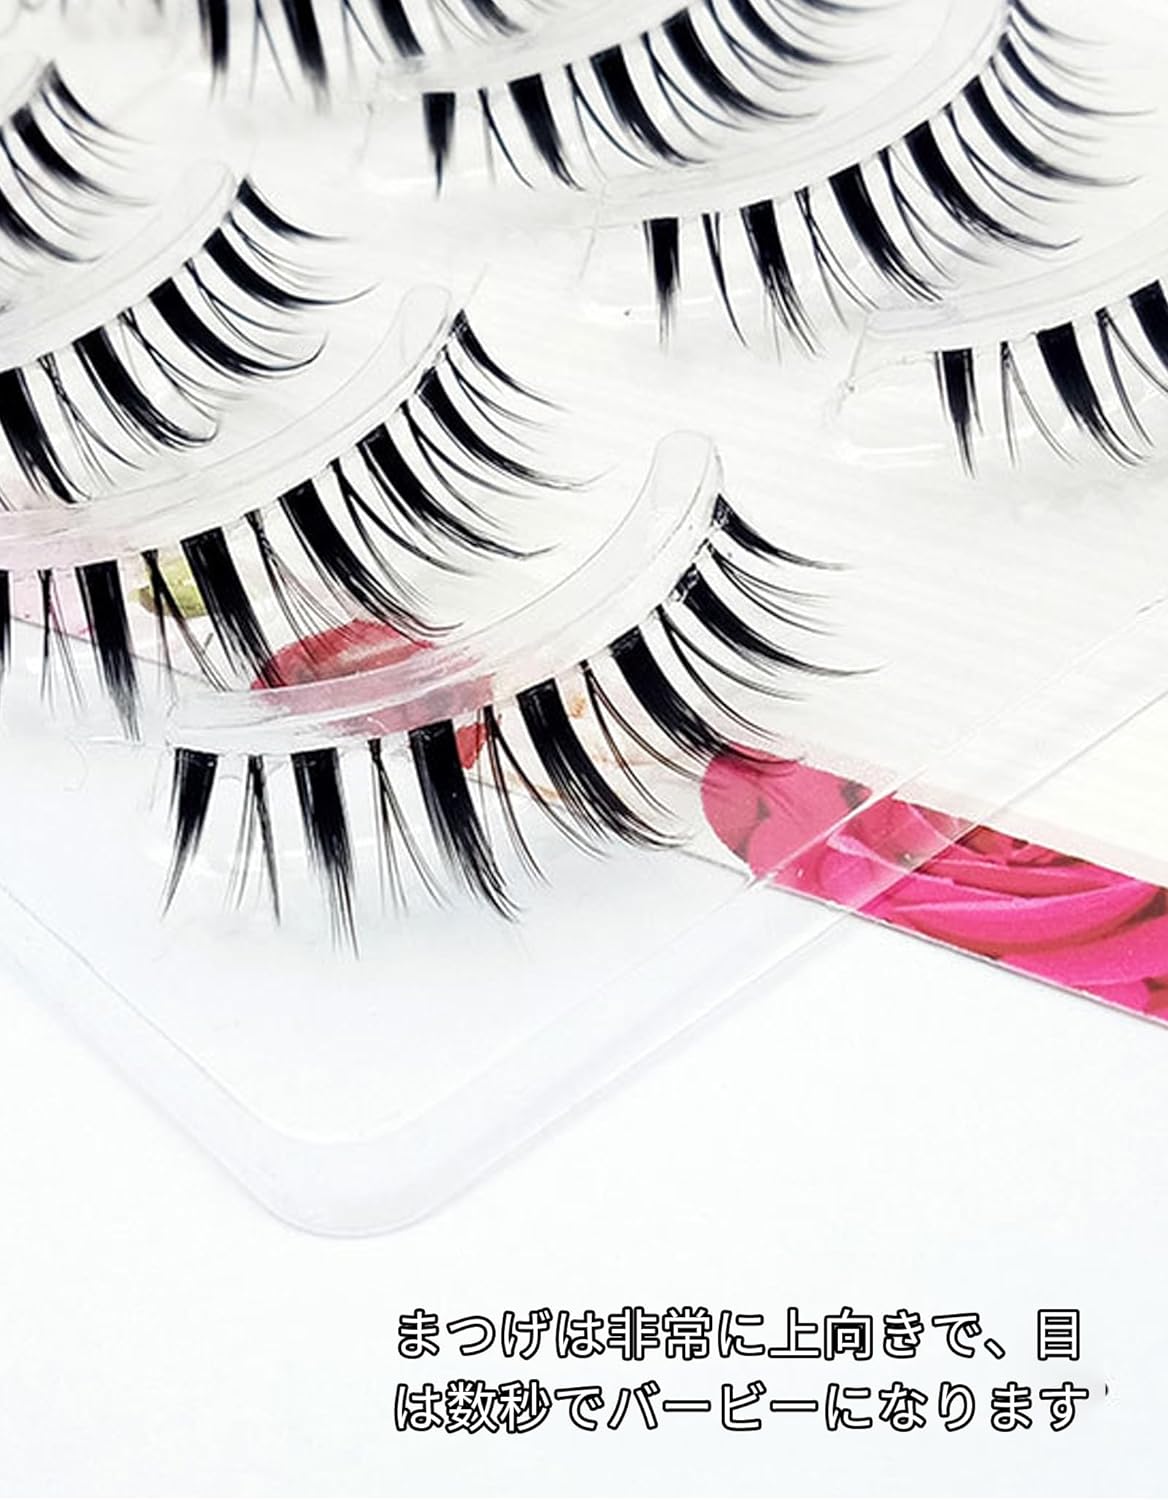 ALLMIRA eyelashes extensions false eyelashes natural eyes . popular nature repetition possible to use home .diy low . ultra easy beginner free shipping 